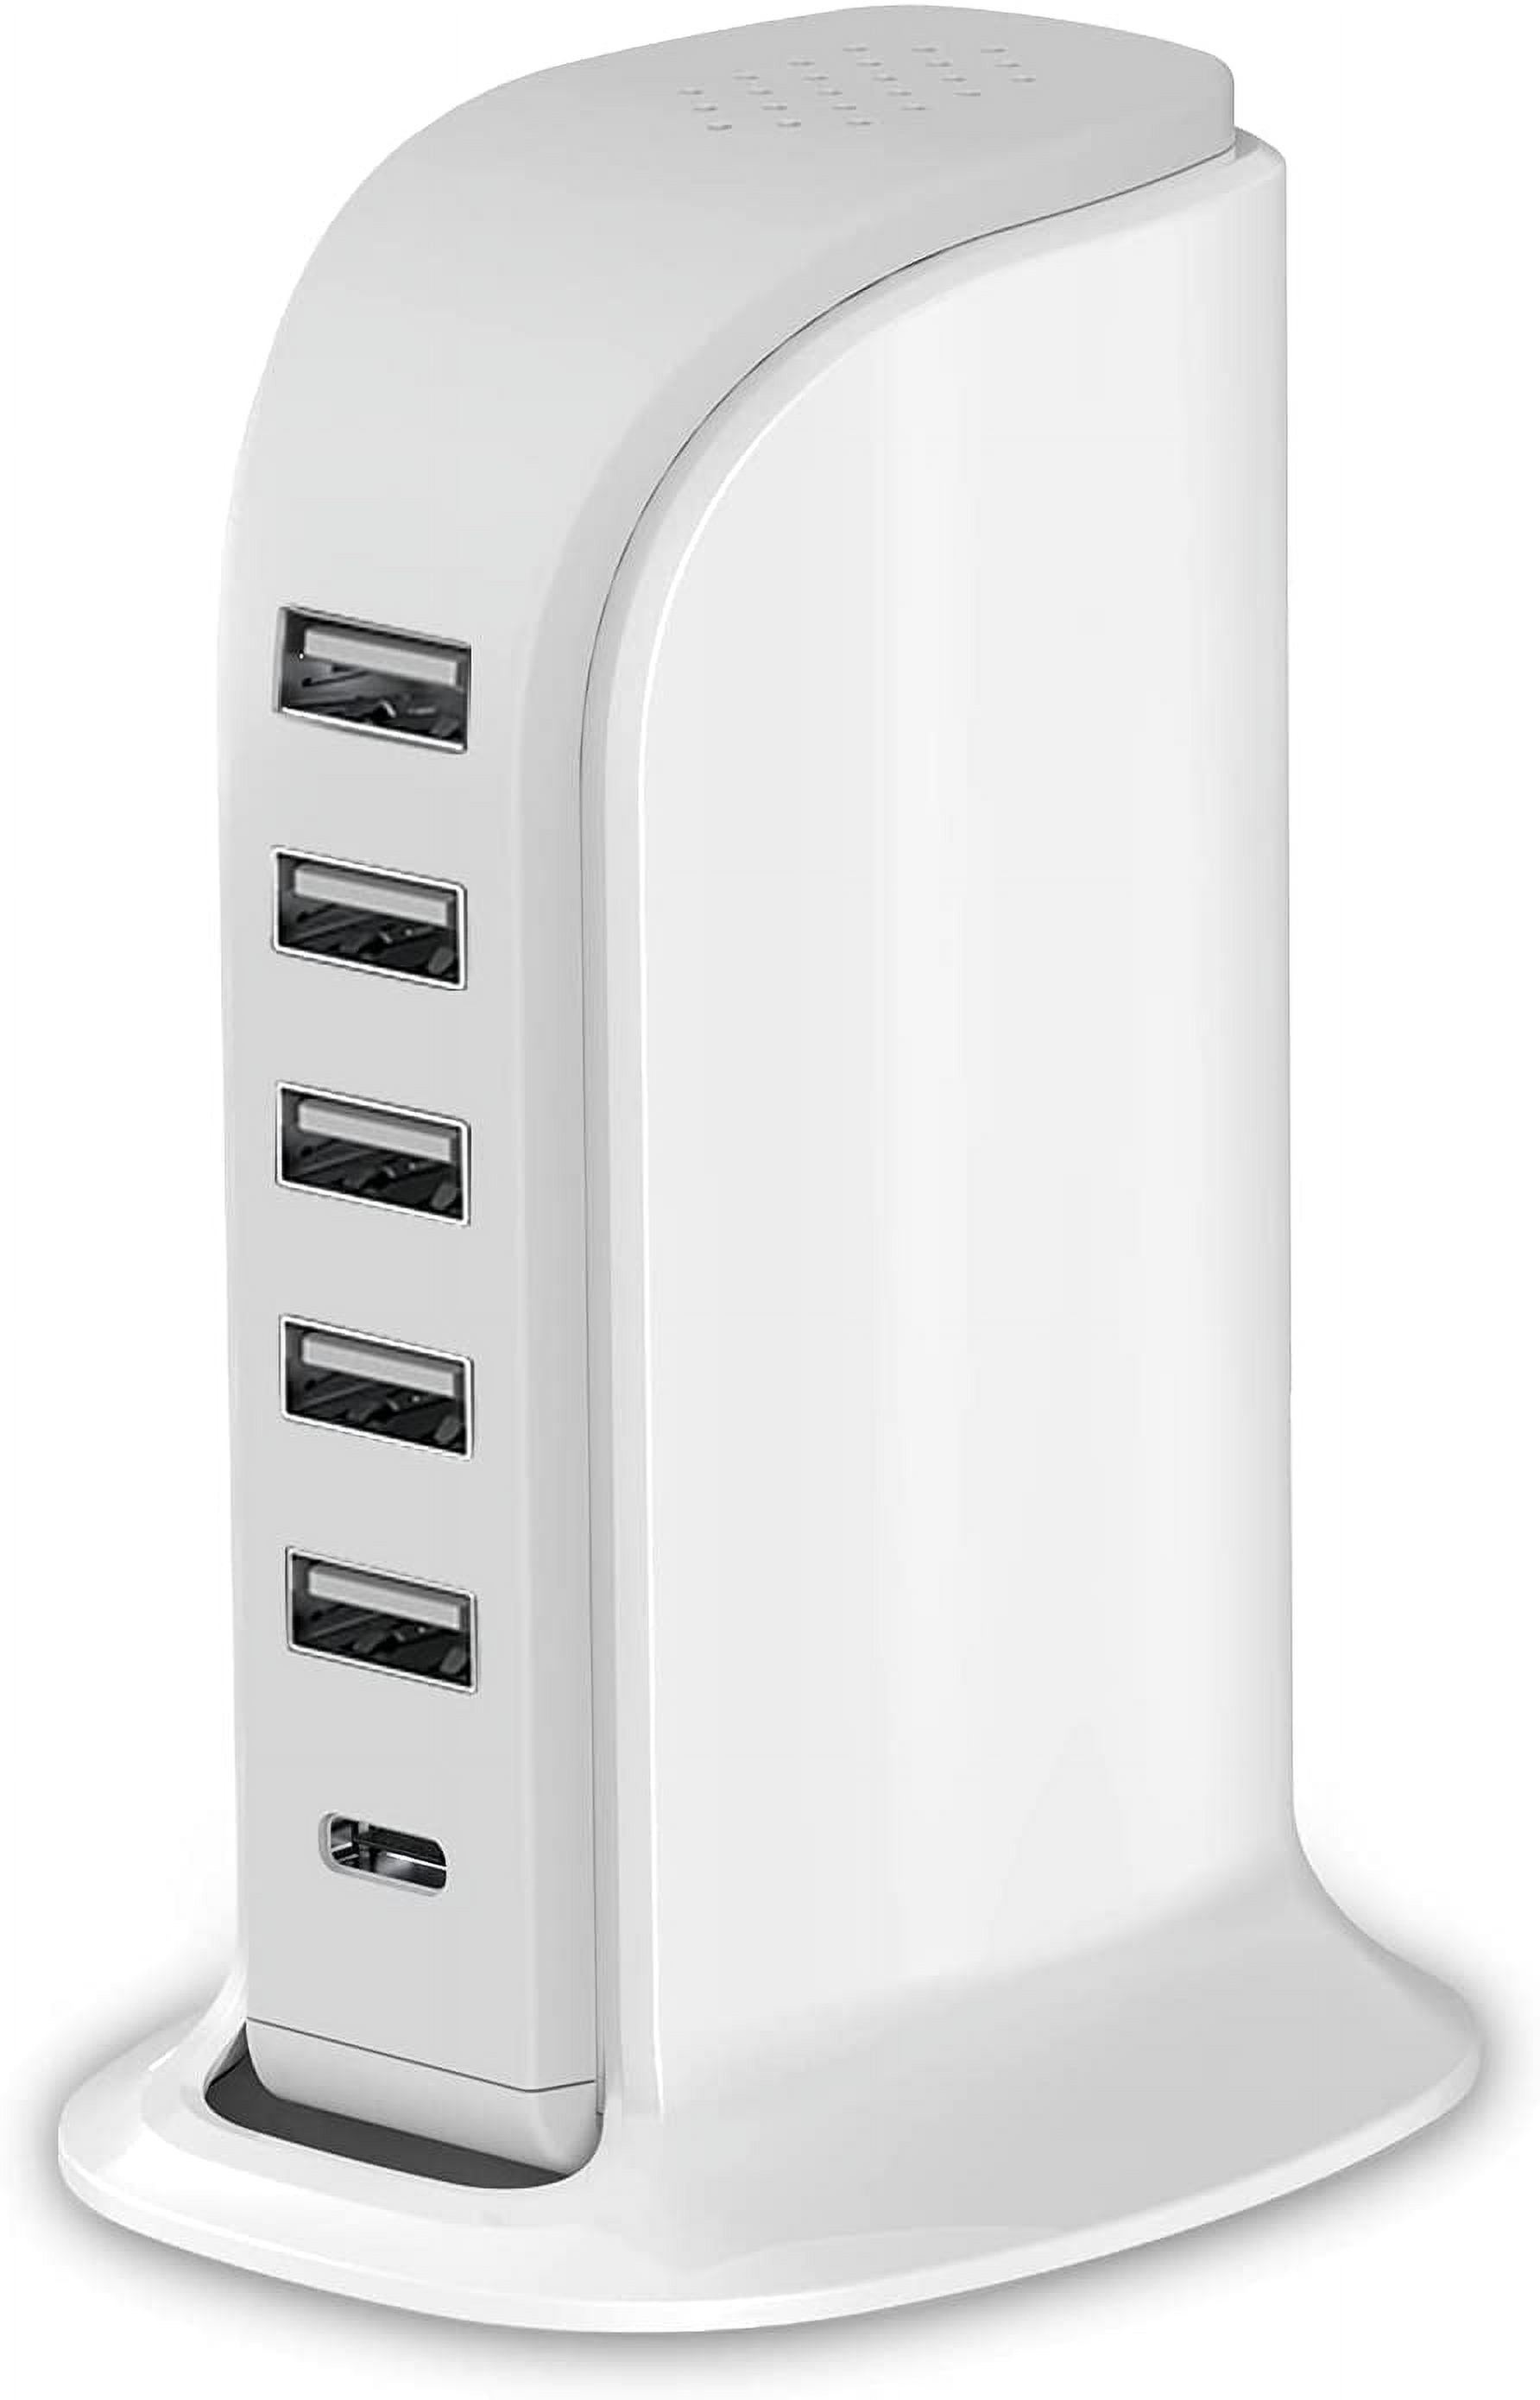 Onn. 40W Wall Unit White, for iPhone ,iPad,Smartphone,Tablet 